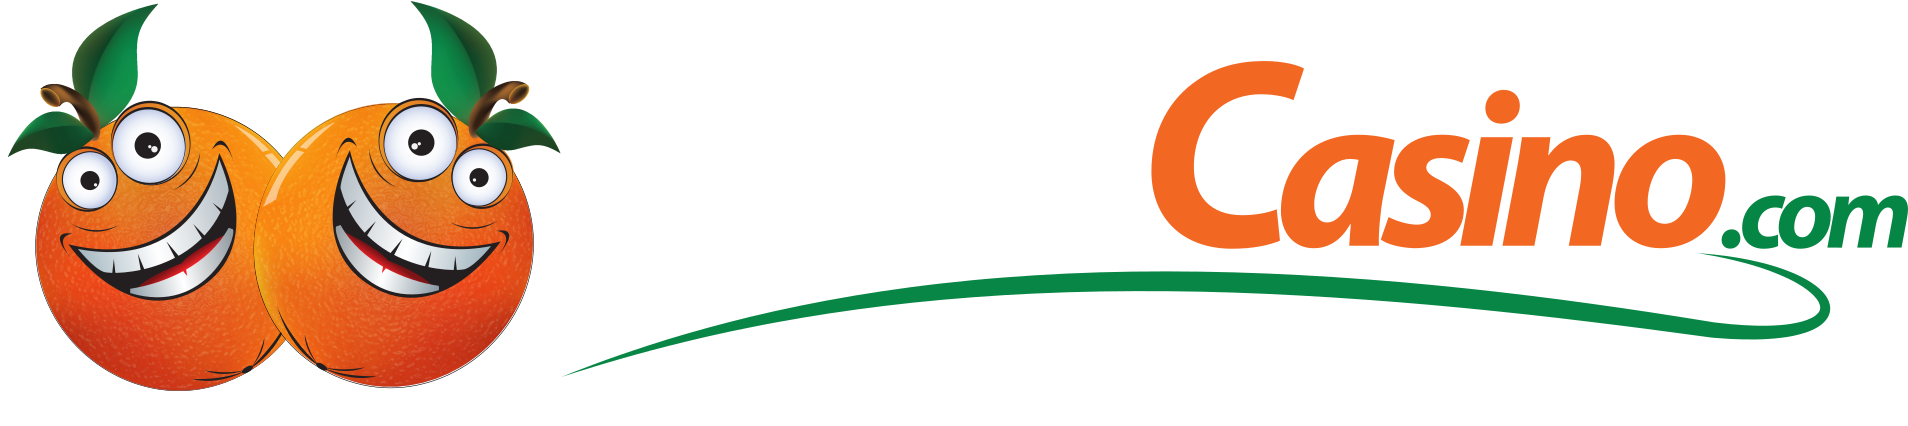 Casino as One of the Latest List of Online Casino Sites with no deposit required